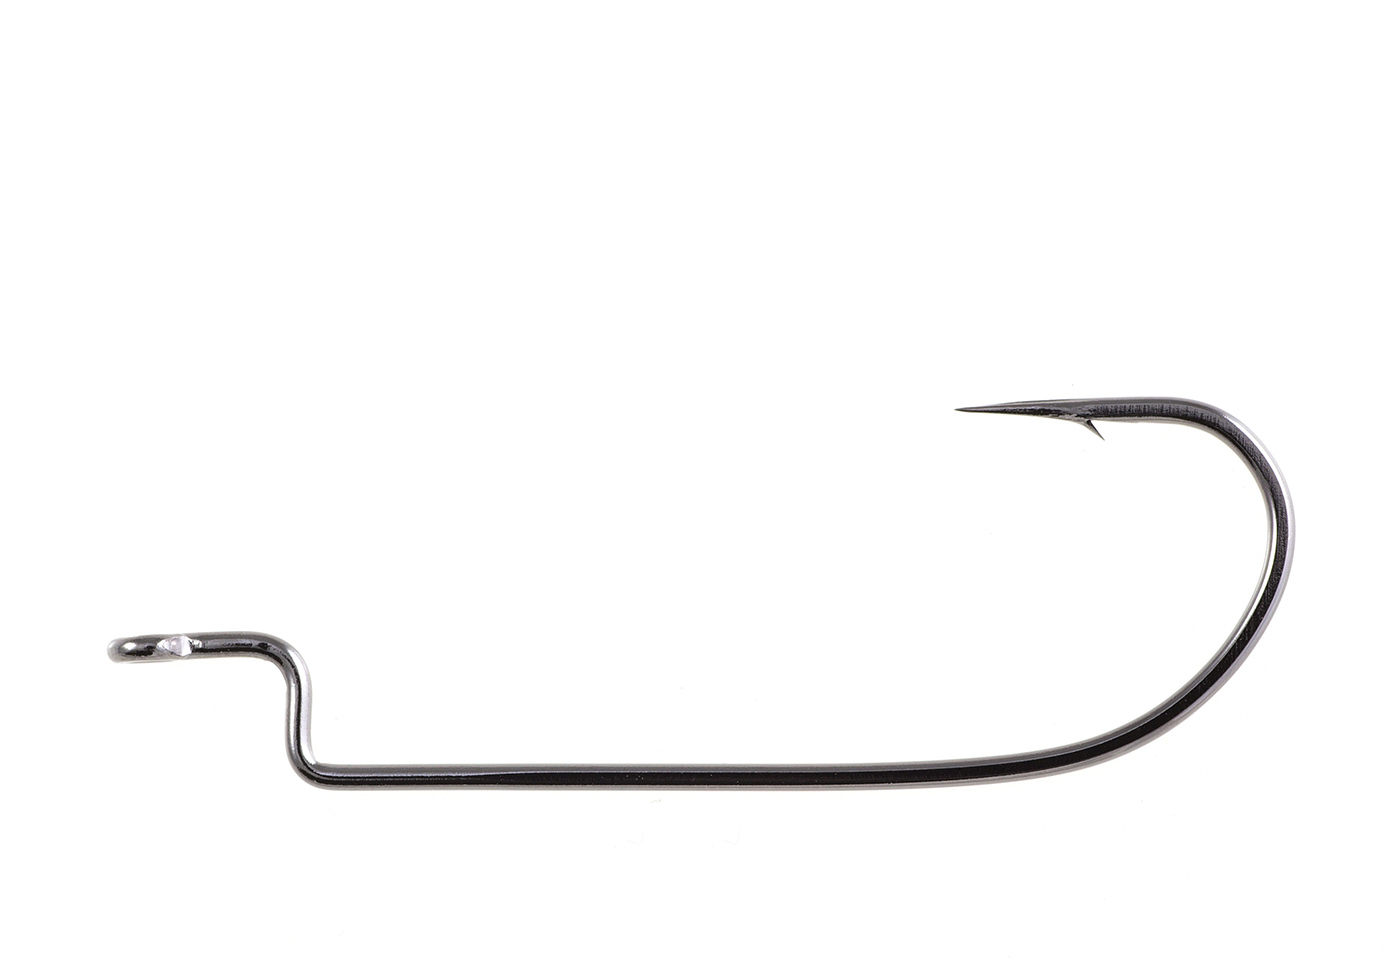  Dr.Fish 100 Pack Offset Worm Hooks Round Bend EWG